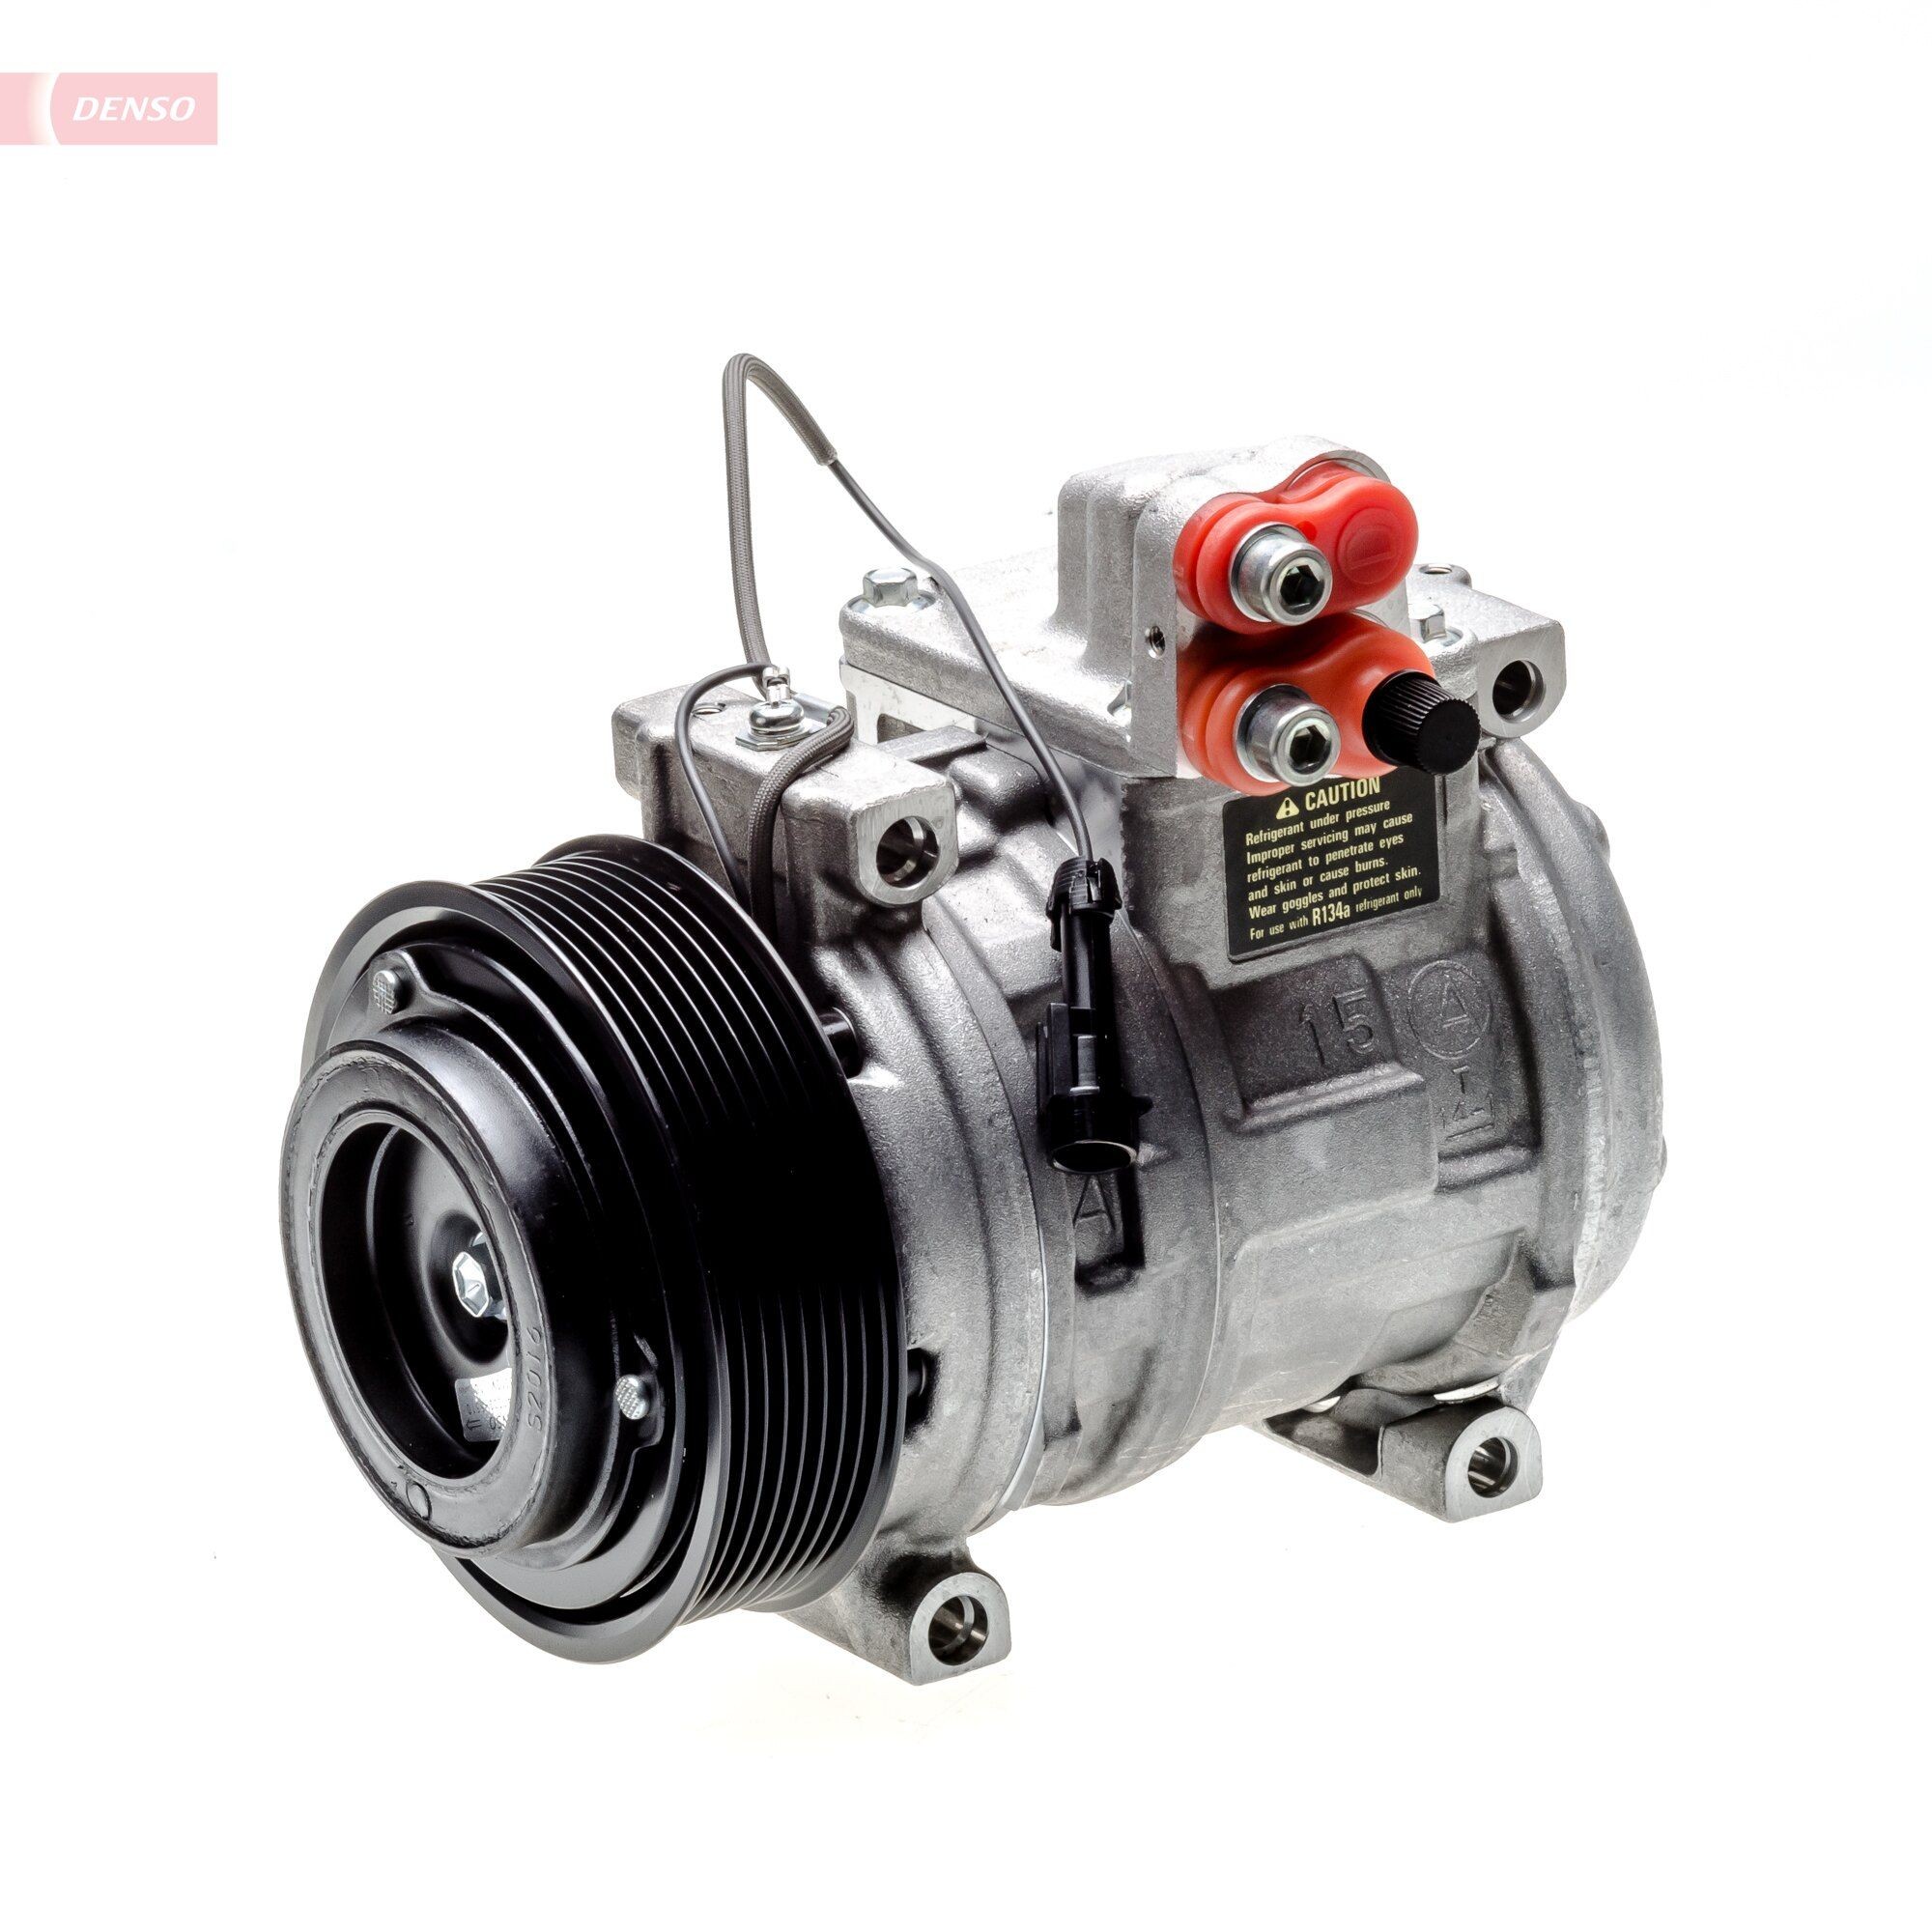 DENSO DCP99505 Air conditioning compressor 10PA15C, 12V, PAG 46, R 134a, with magnetic clutch